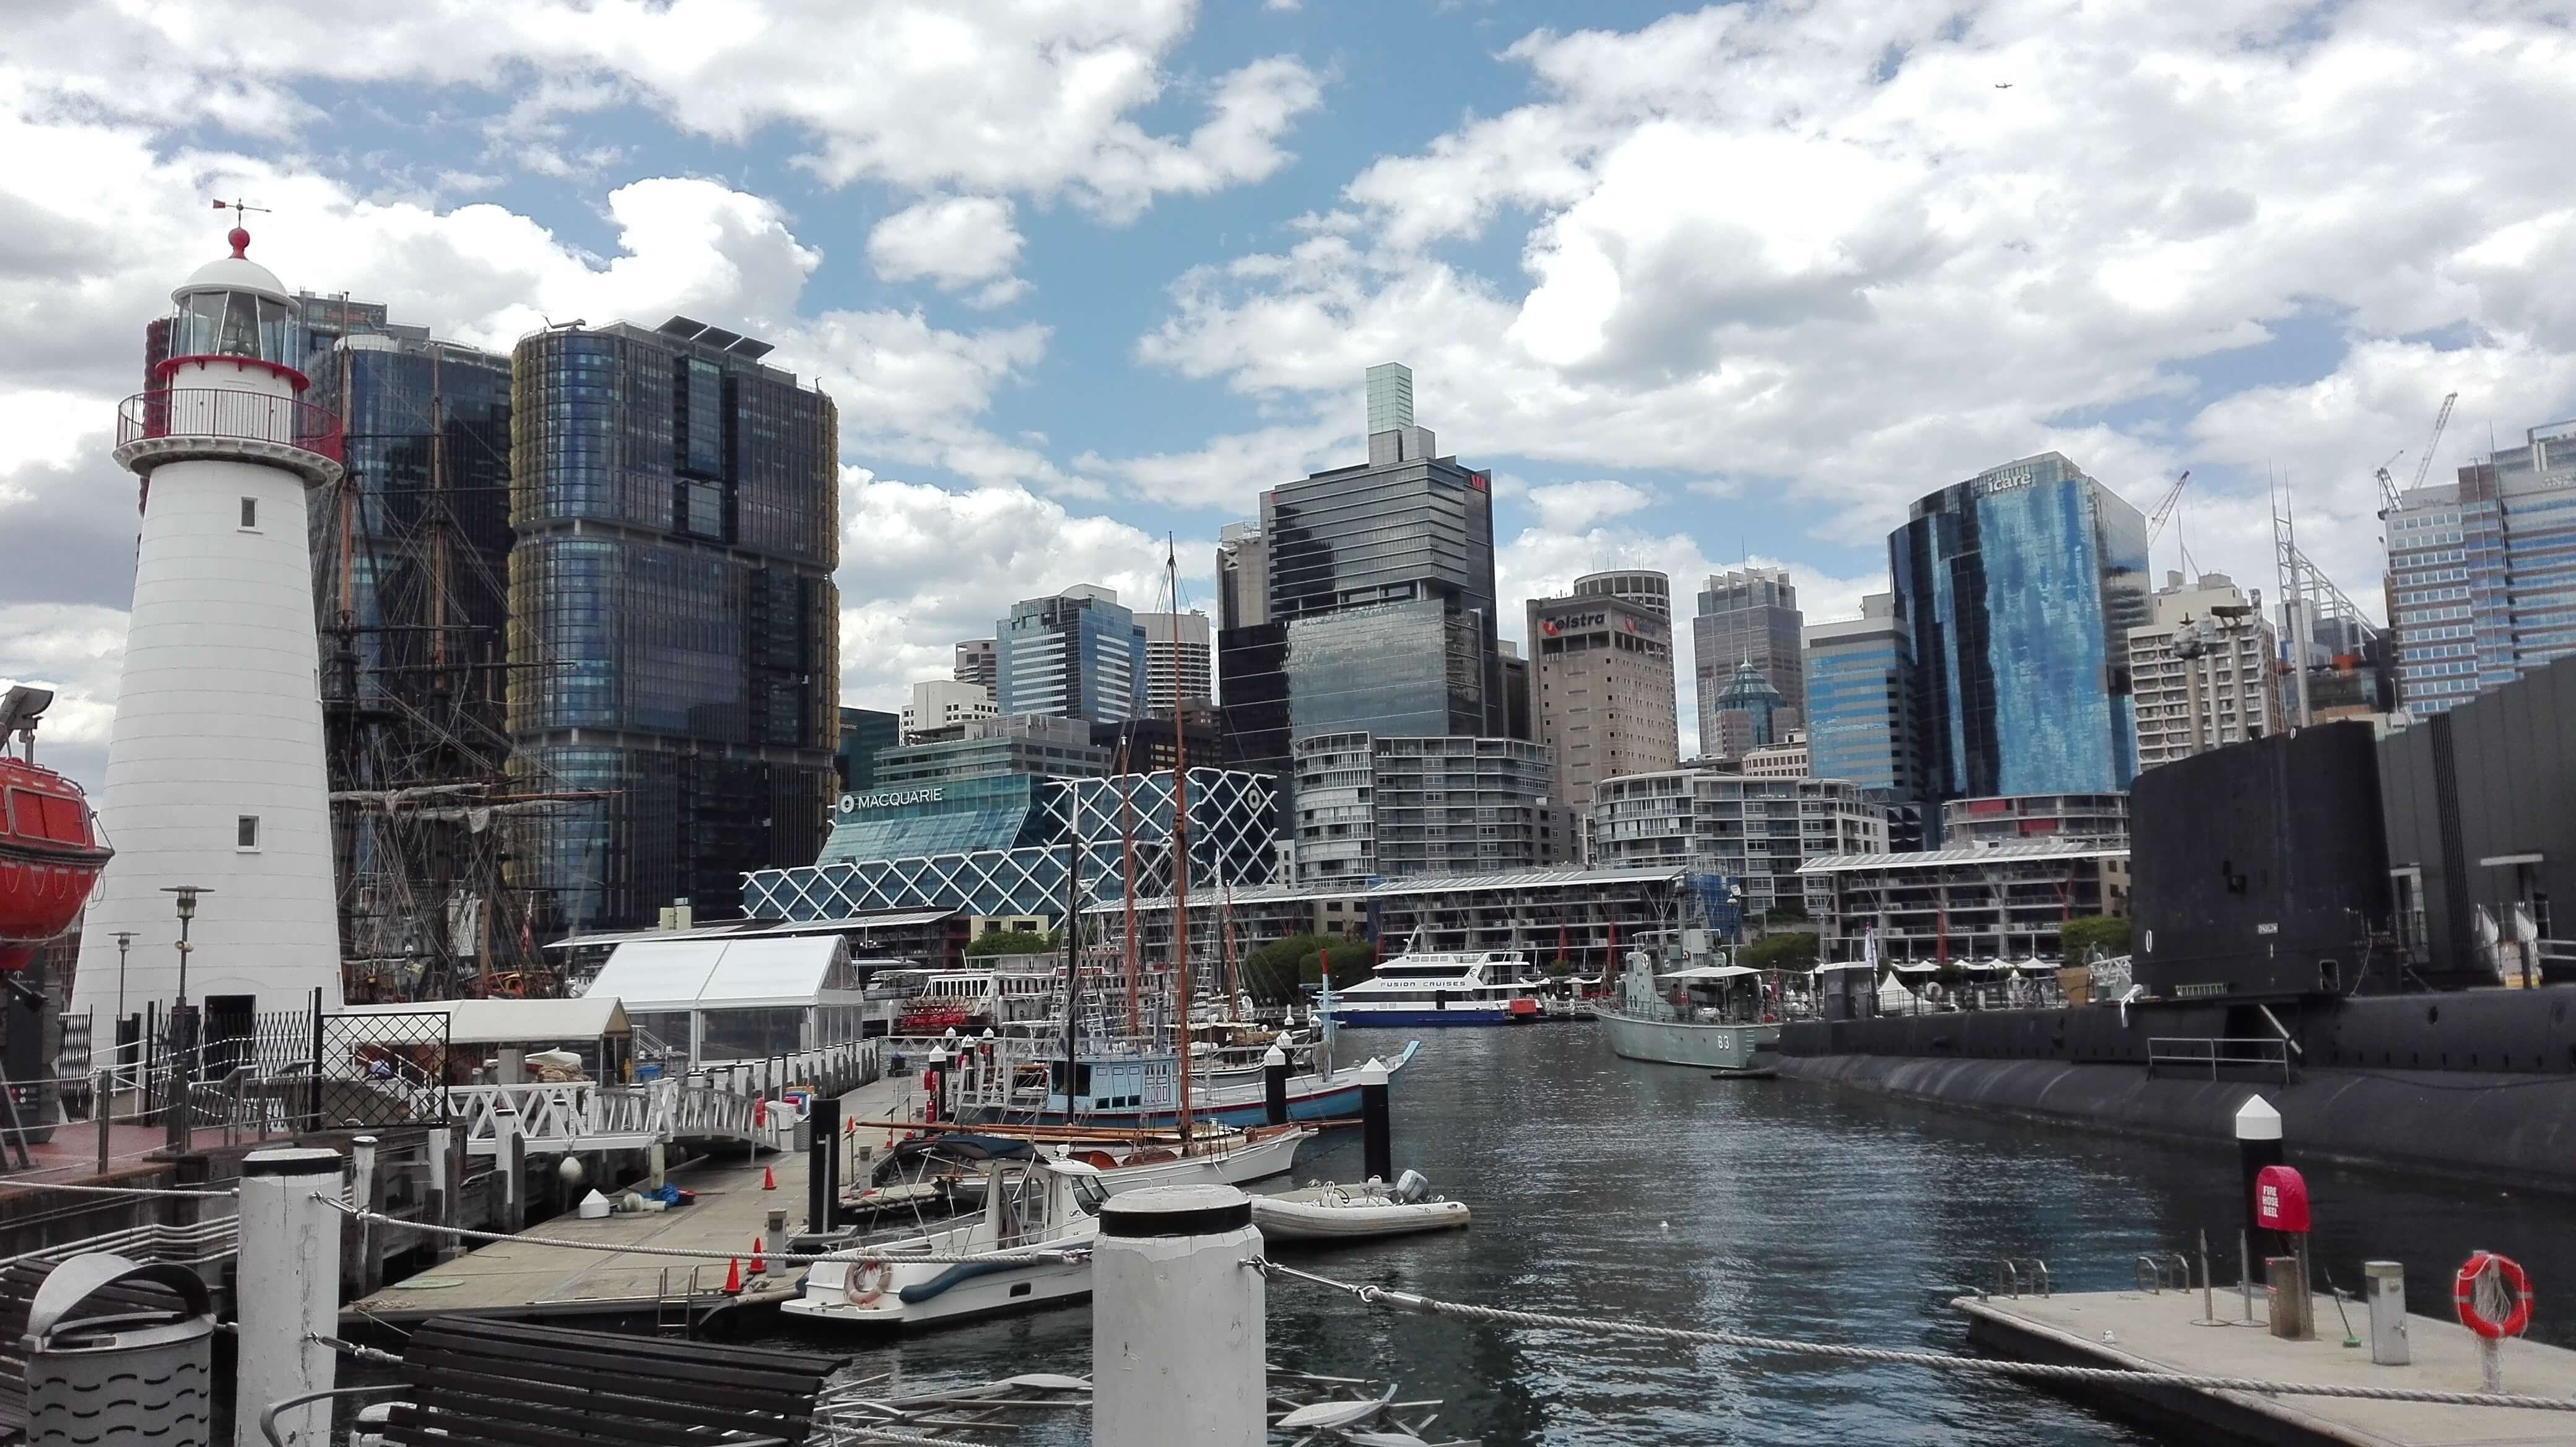 Walking around the Darling Harbour